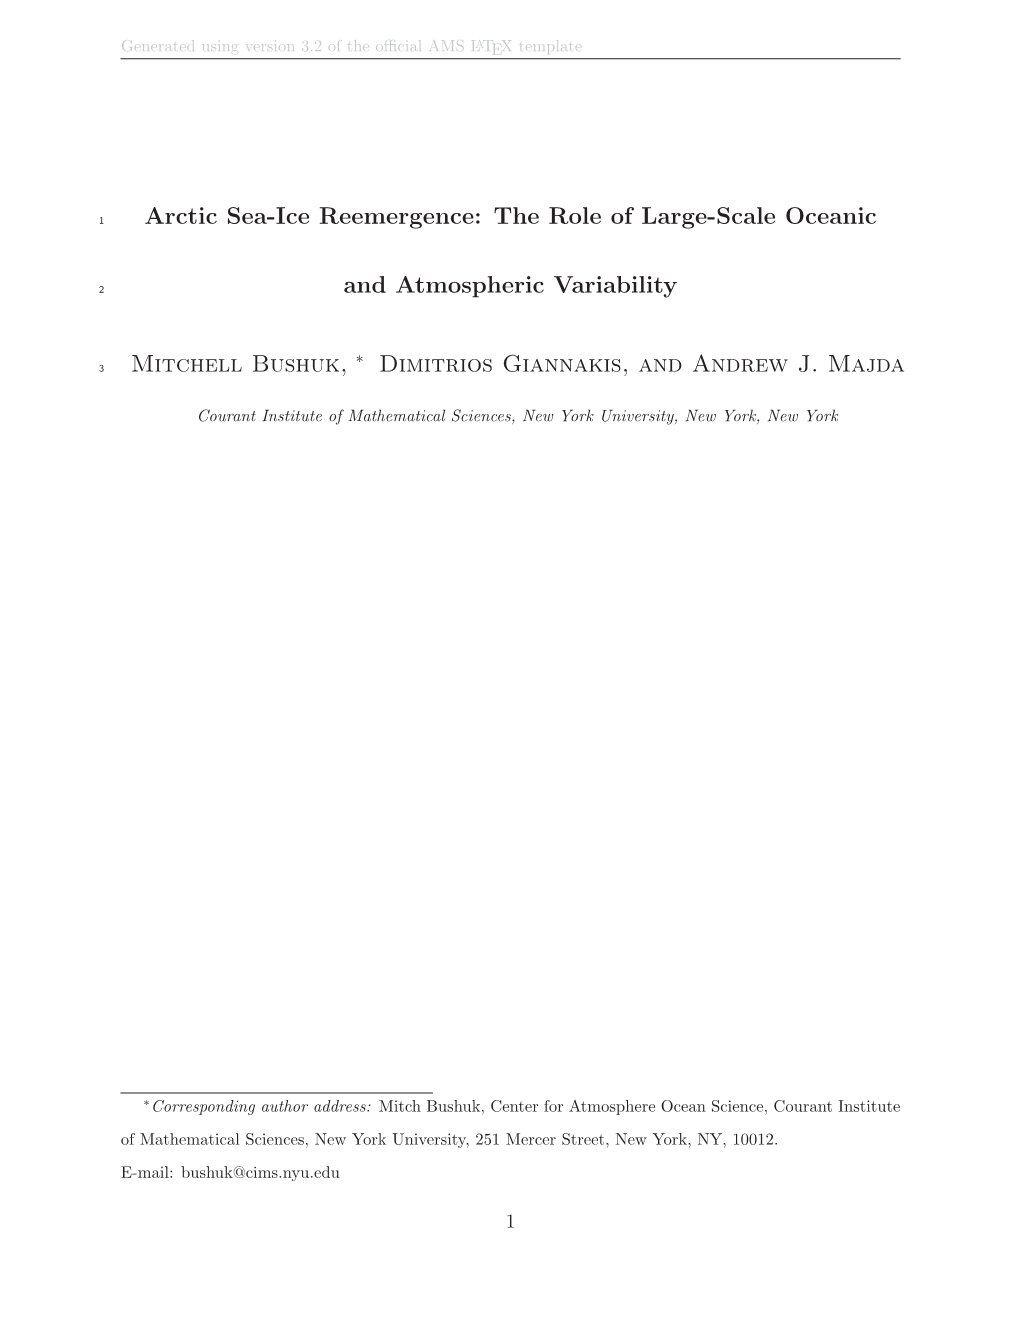 Arctic Sea-Ice Reemergence: the Role of Large-Scale Oceanic And